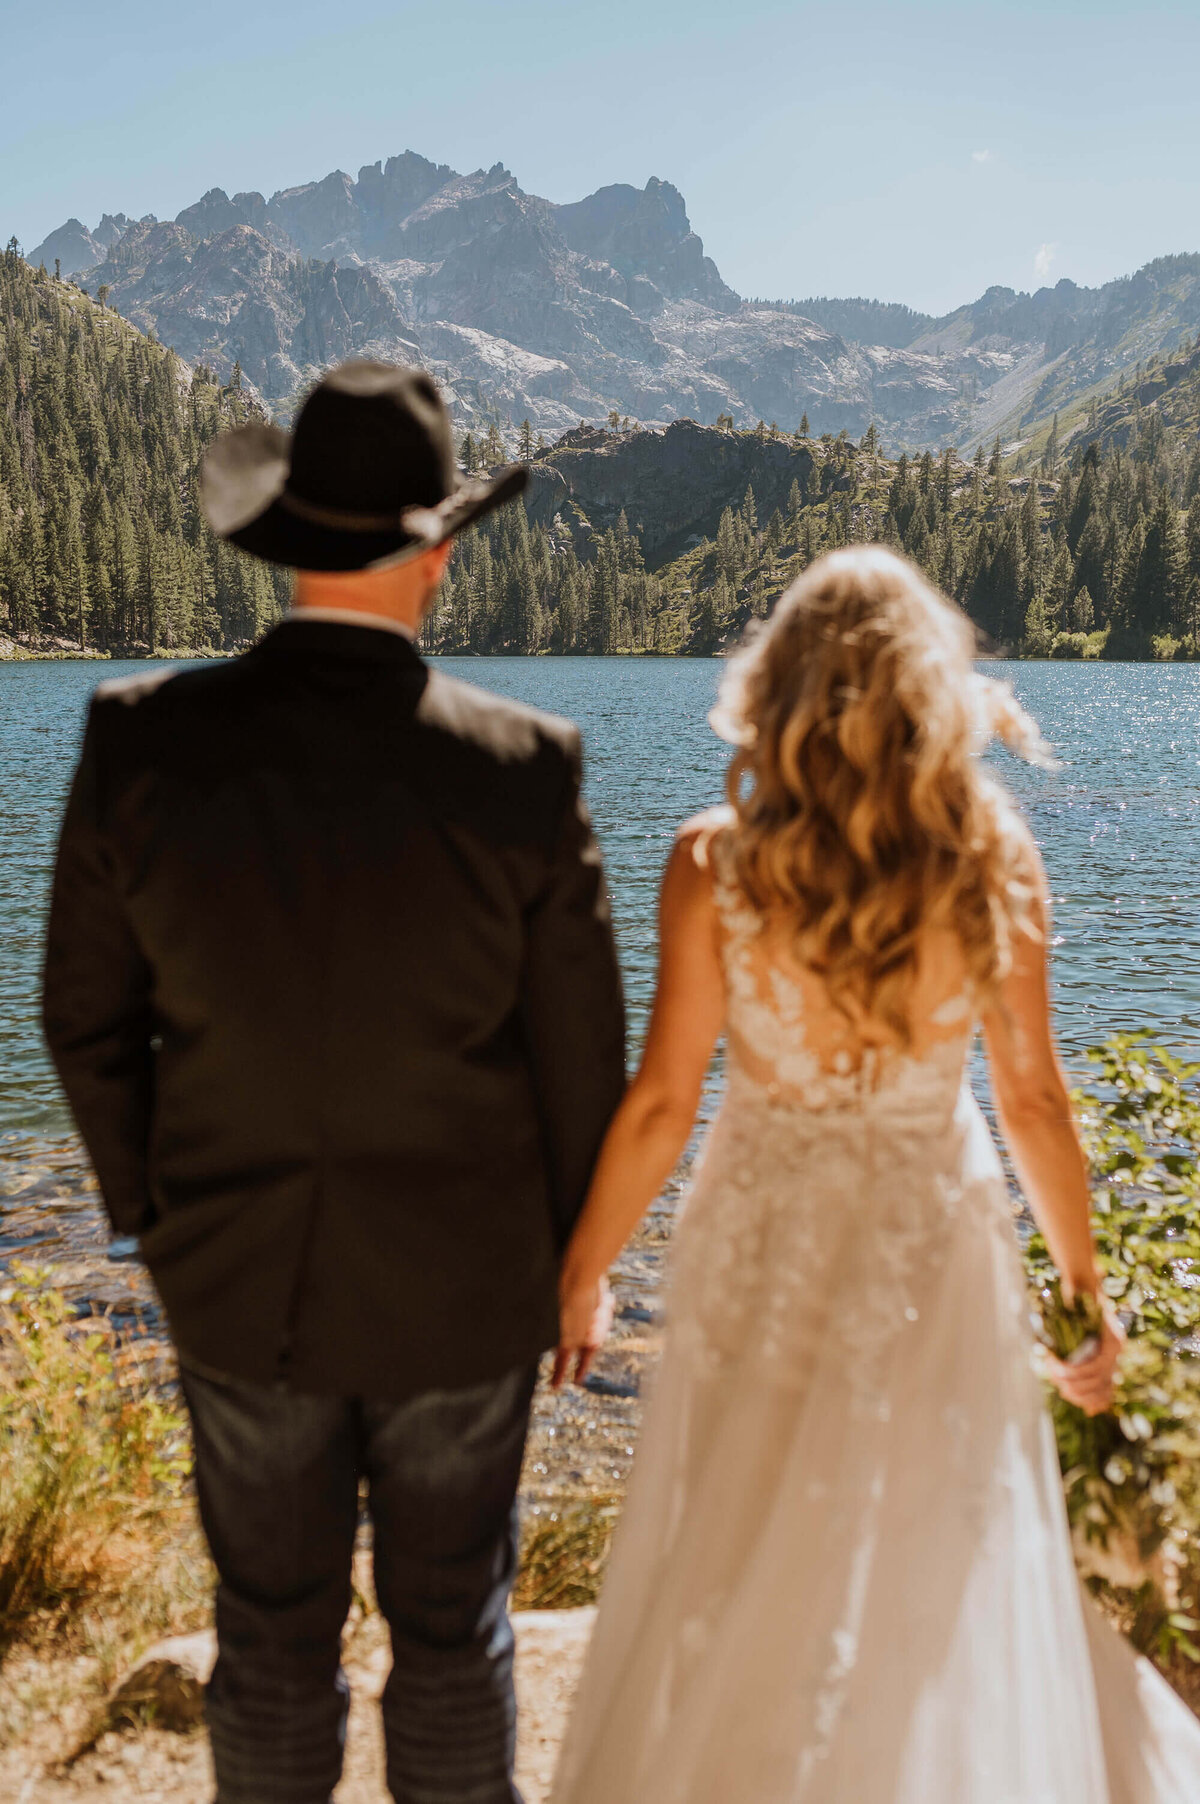 A couple in wedding attire looking out at the mountains.